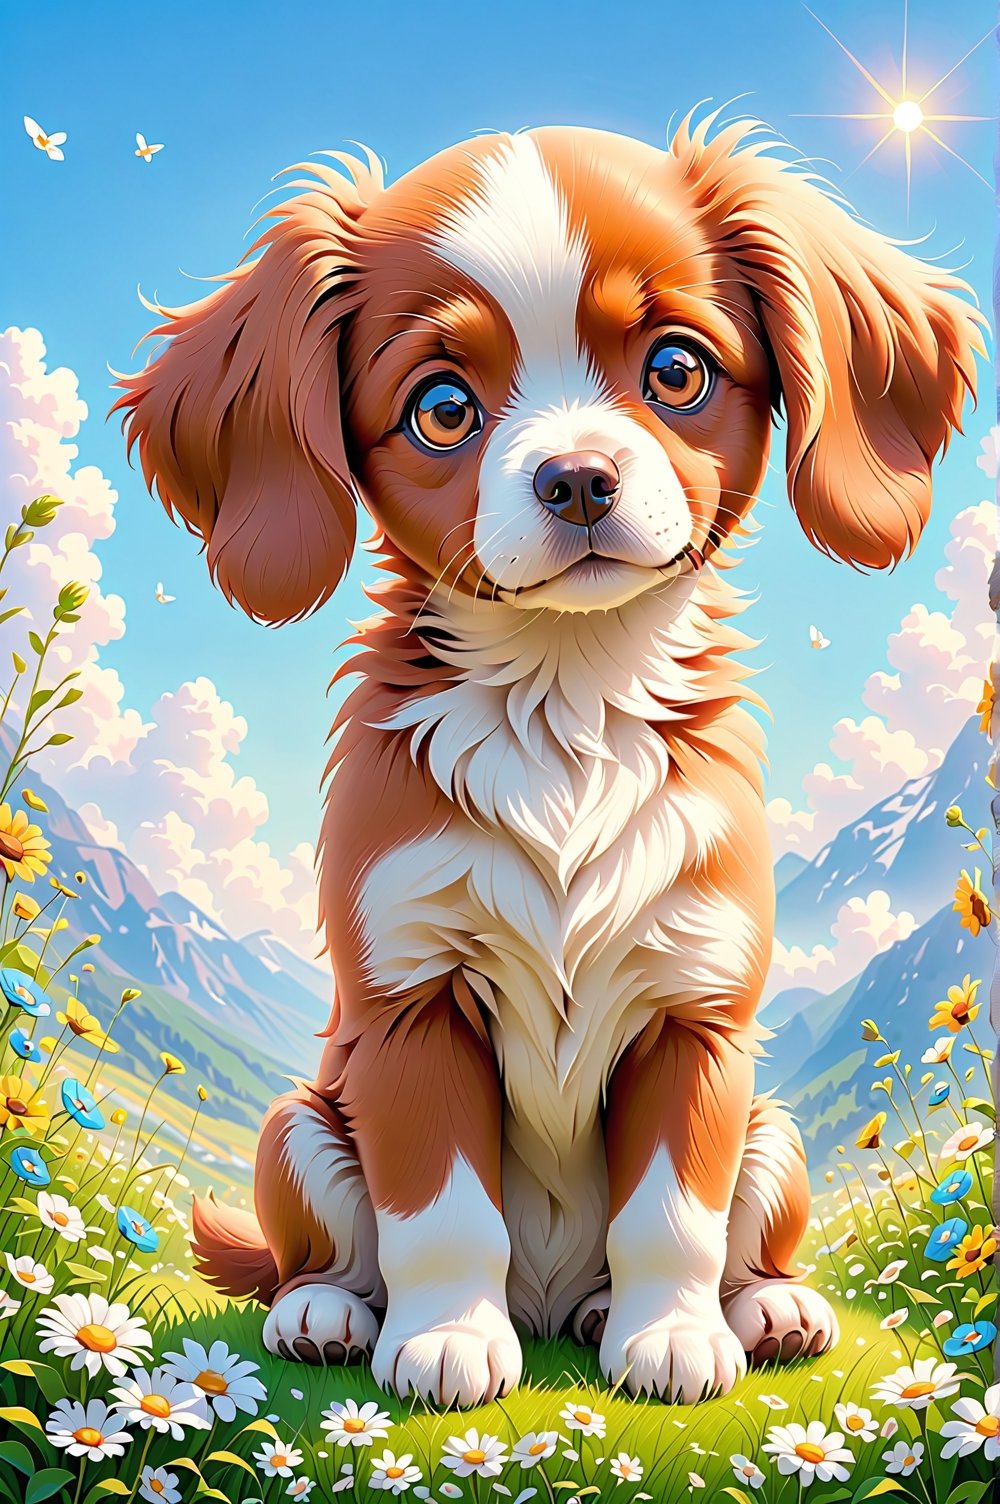 A captivating digital painting of a young Brittany puppy sitting in a comical pose, with its head tilted and an expression of doubt on its face. The puppy's eyes are filled with curiosity, and its fur is rendered with incredible detail and a vibrant sheen. The background showcases a serene spring weather scene, with blooming flowers, a blue sky, and a warm sun. This adorable and heartwarming artwork captures the essence of youthful innocence and the beauty of nature during the onset of spring.